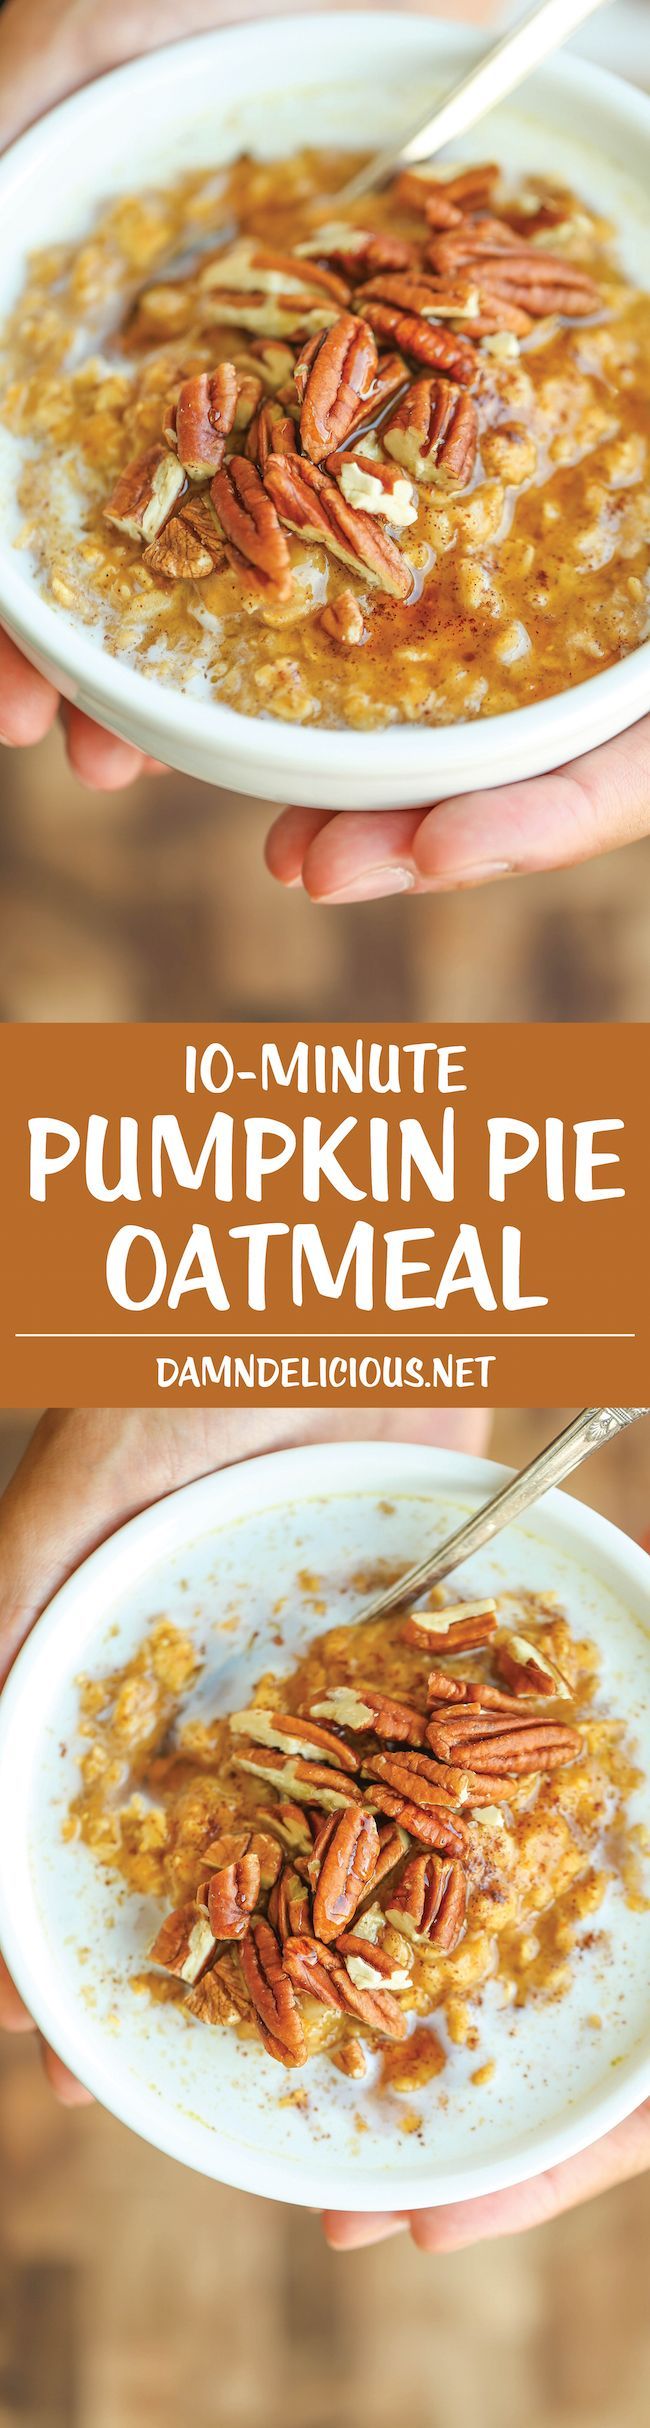 Pumpkin Pie Oatmeal – Yes, pumpkin pie for breakfast is completely acceptable! And